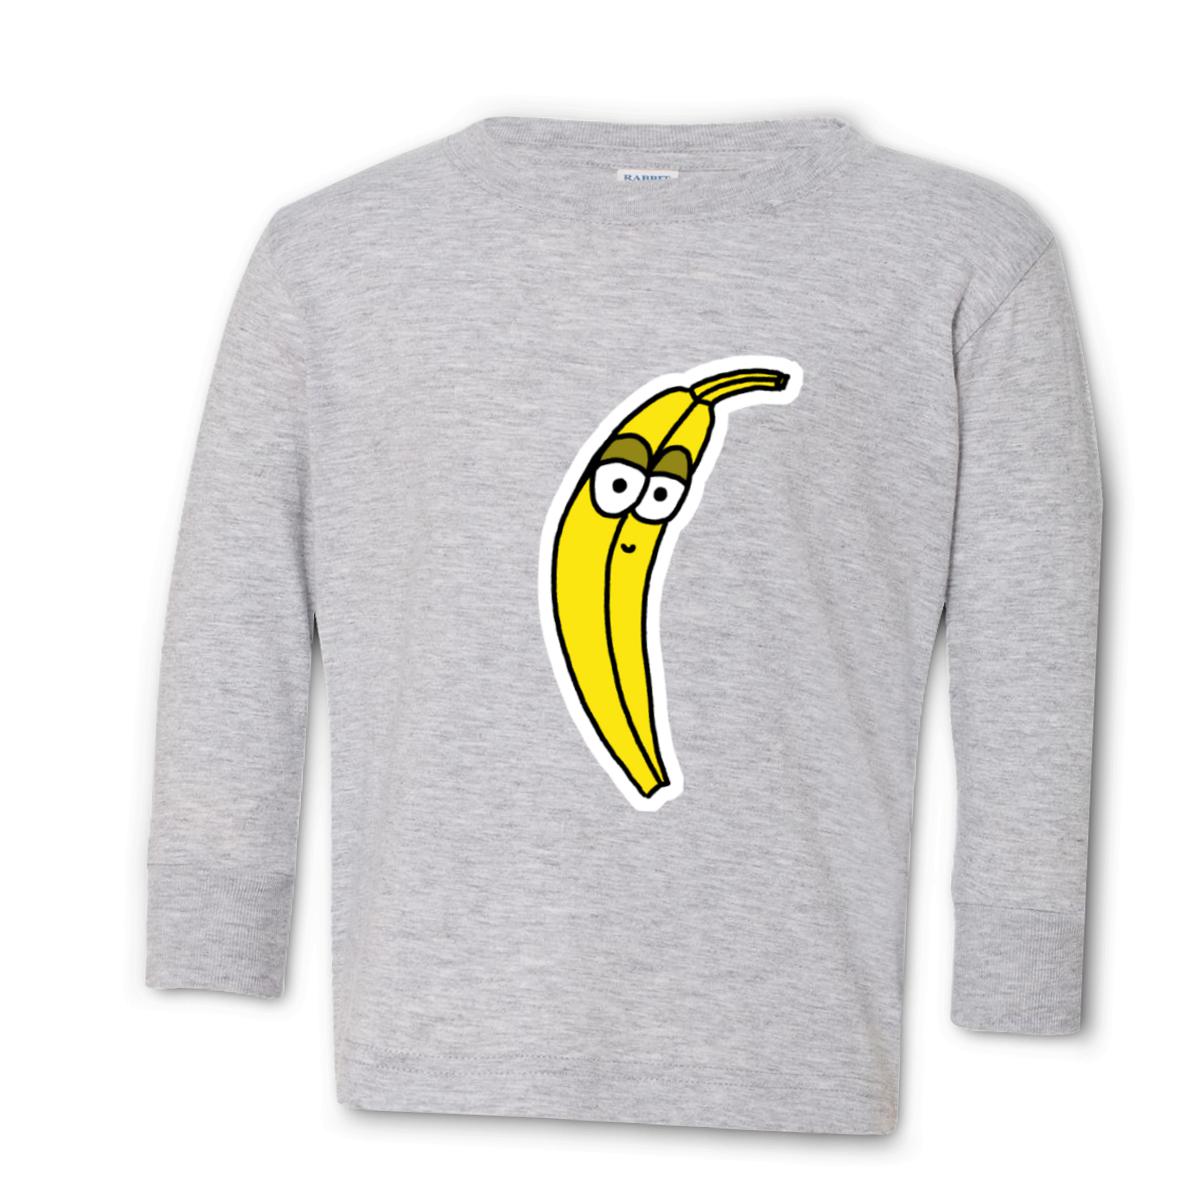 Plantain Toddler Long Sleeve Tee 4T heather